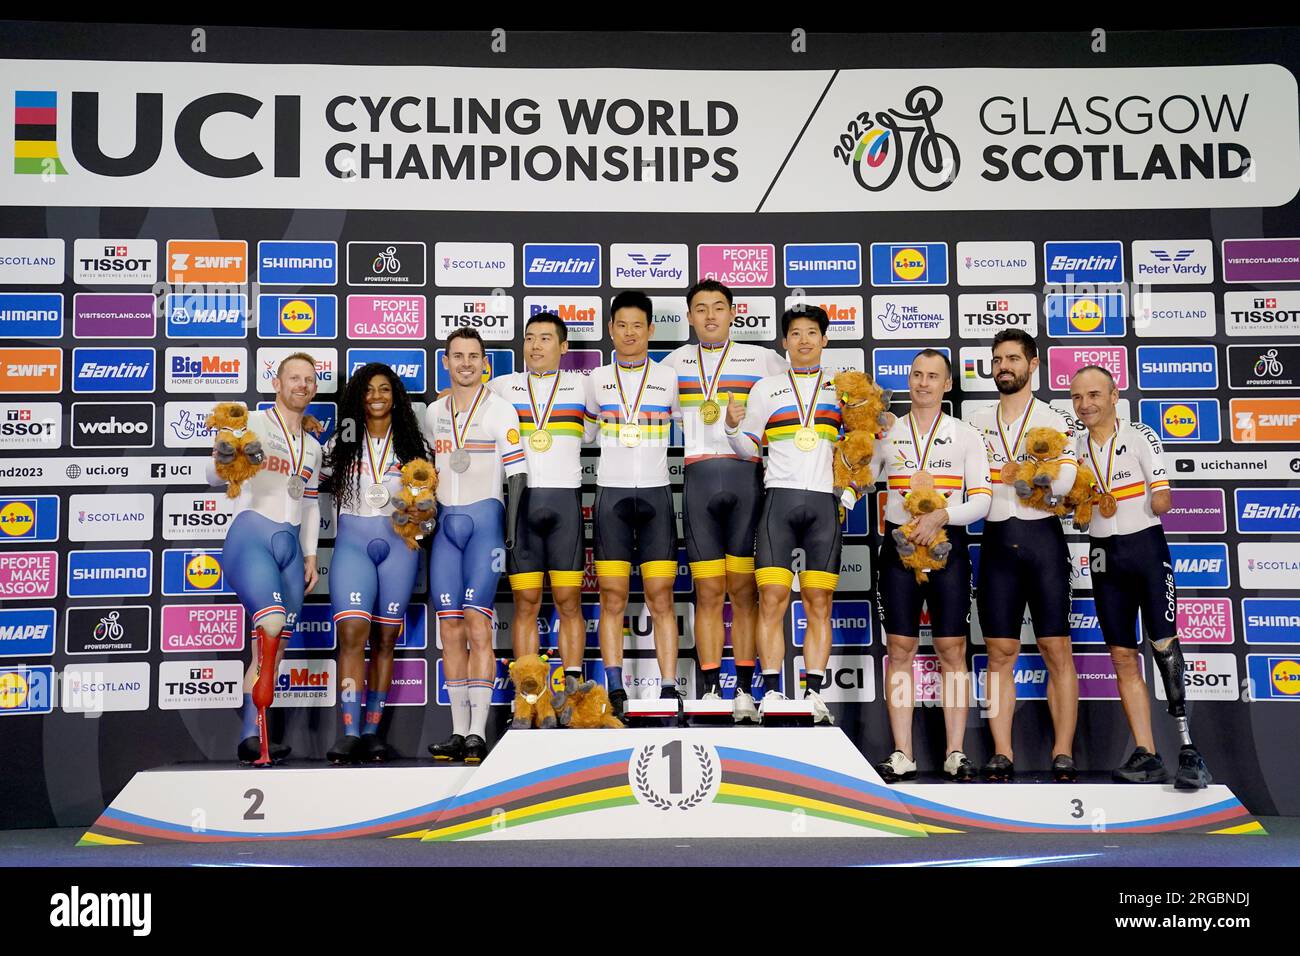 China's Zhangyu Li, Guoqing Wu and Shanzhang Lai (centre) pose with their gold medals following the Mixed C Team Sprint, alongside Great Britain's Kadeena Cox, Jaco van Gass and Jody Cundy with silver (left) and Spain's Ricardo Ten Argiles, Pablo Jaramillo Gallardo and Alfonso Cabello Llamas with bronze during day six of the 2023 UCI Cycling World Championships at the Sir Chris Hoy Velodrome, Glasgow. Picture date: Tuesday August 8, 2023. Stock Photo